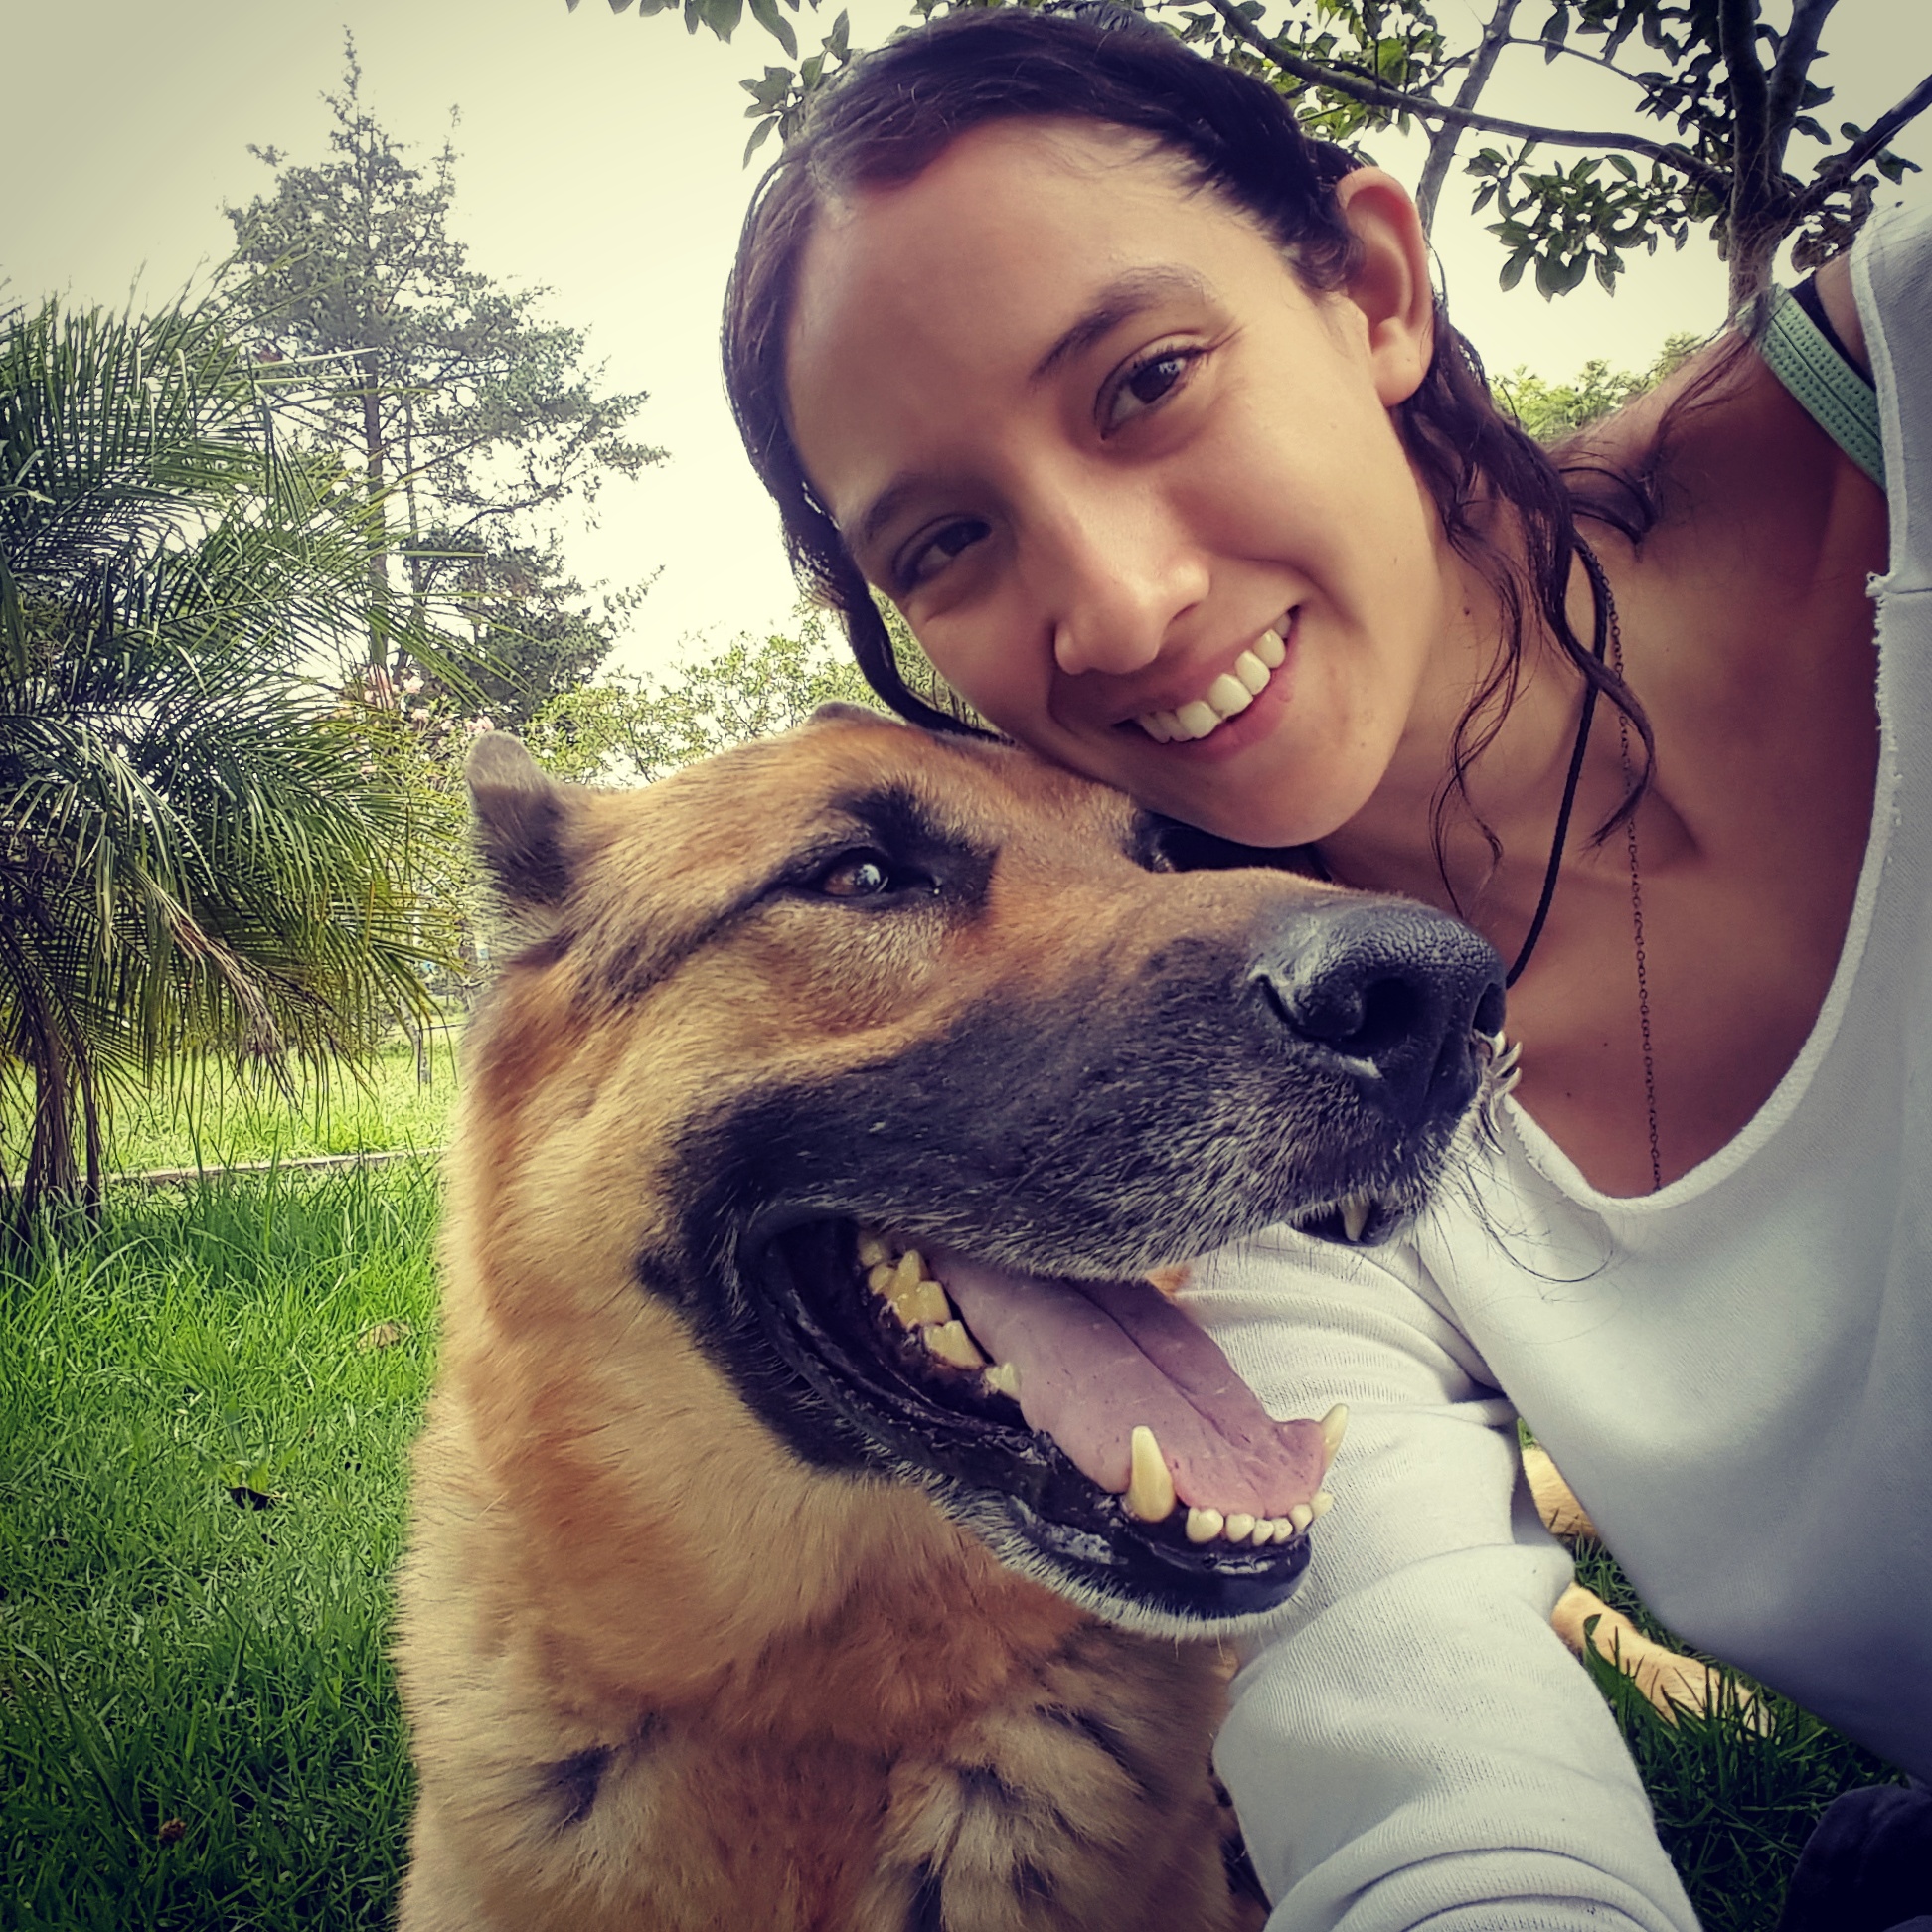 Picture of Izzy Quintana with her dog Coco, a smiling German Shepherd